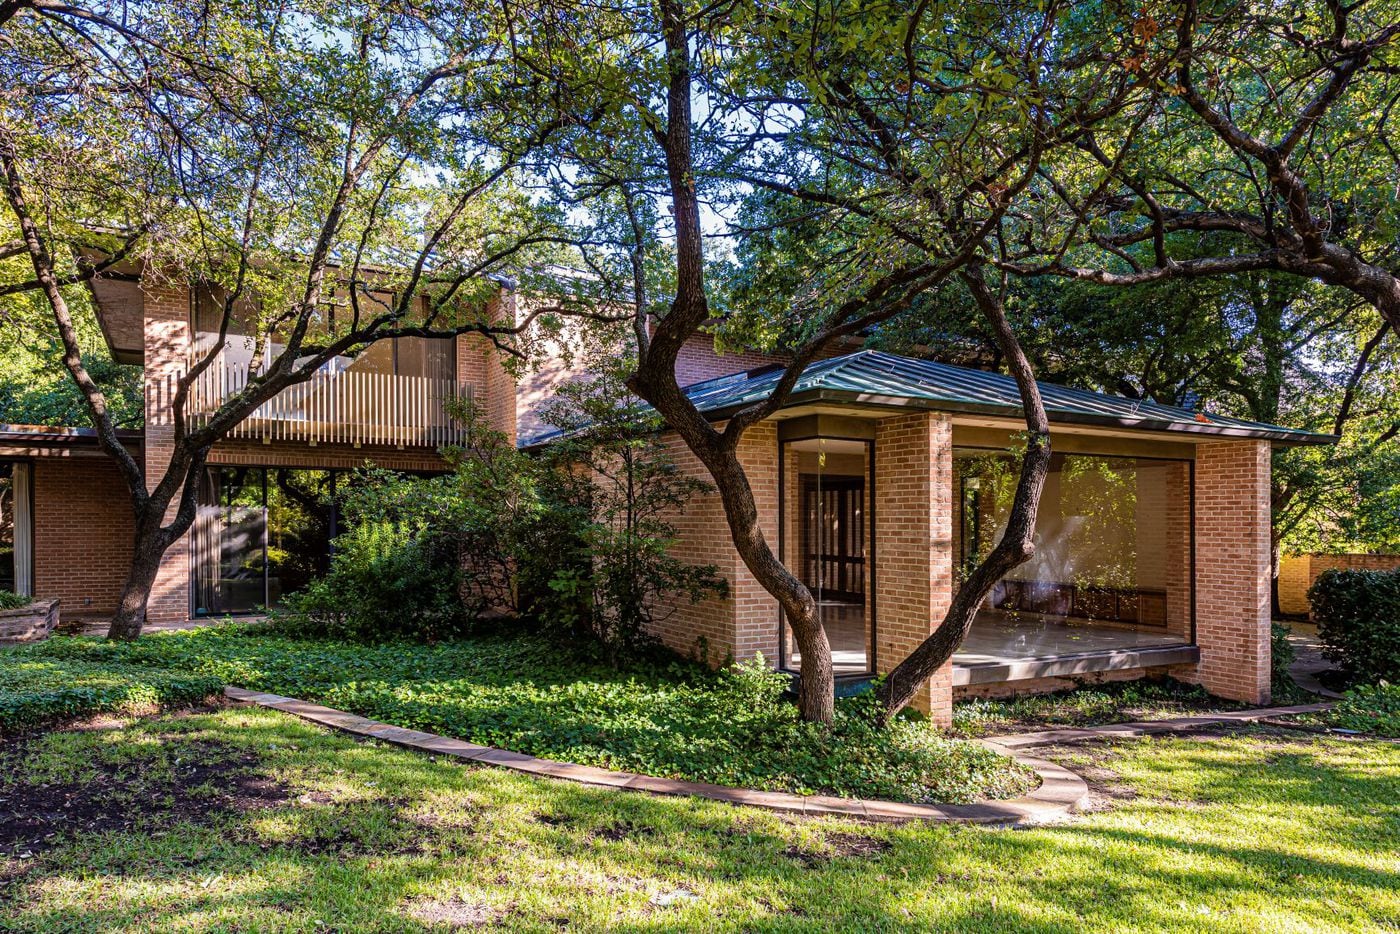 A look at the McDermott House on Preservation Dallas  Modern Masterpieces Fall Architectural Tour.